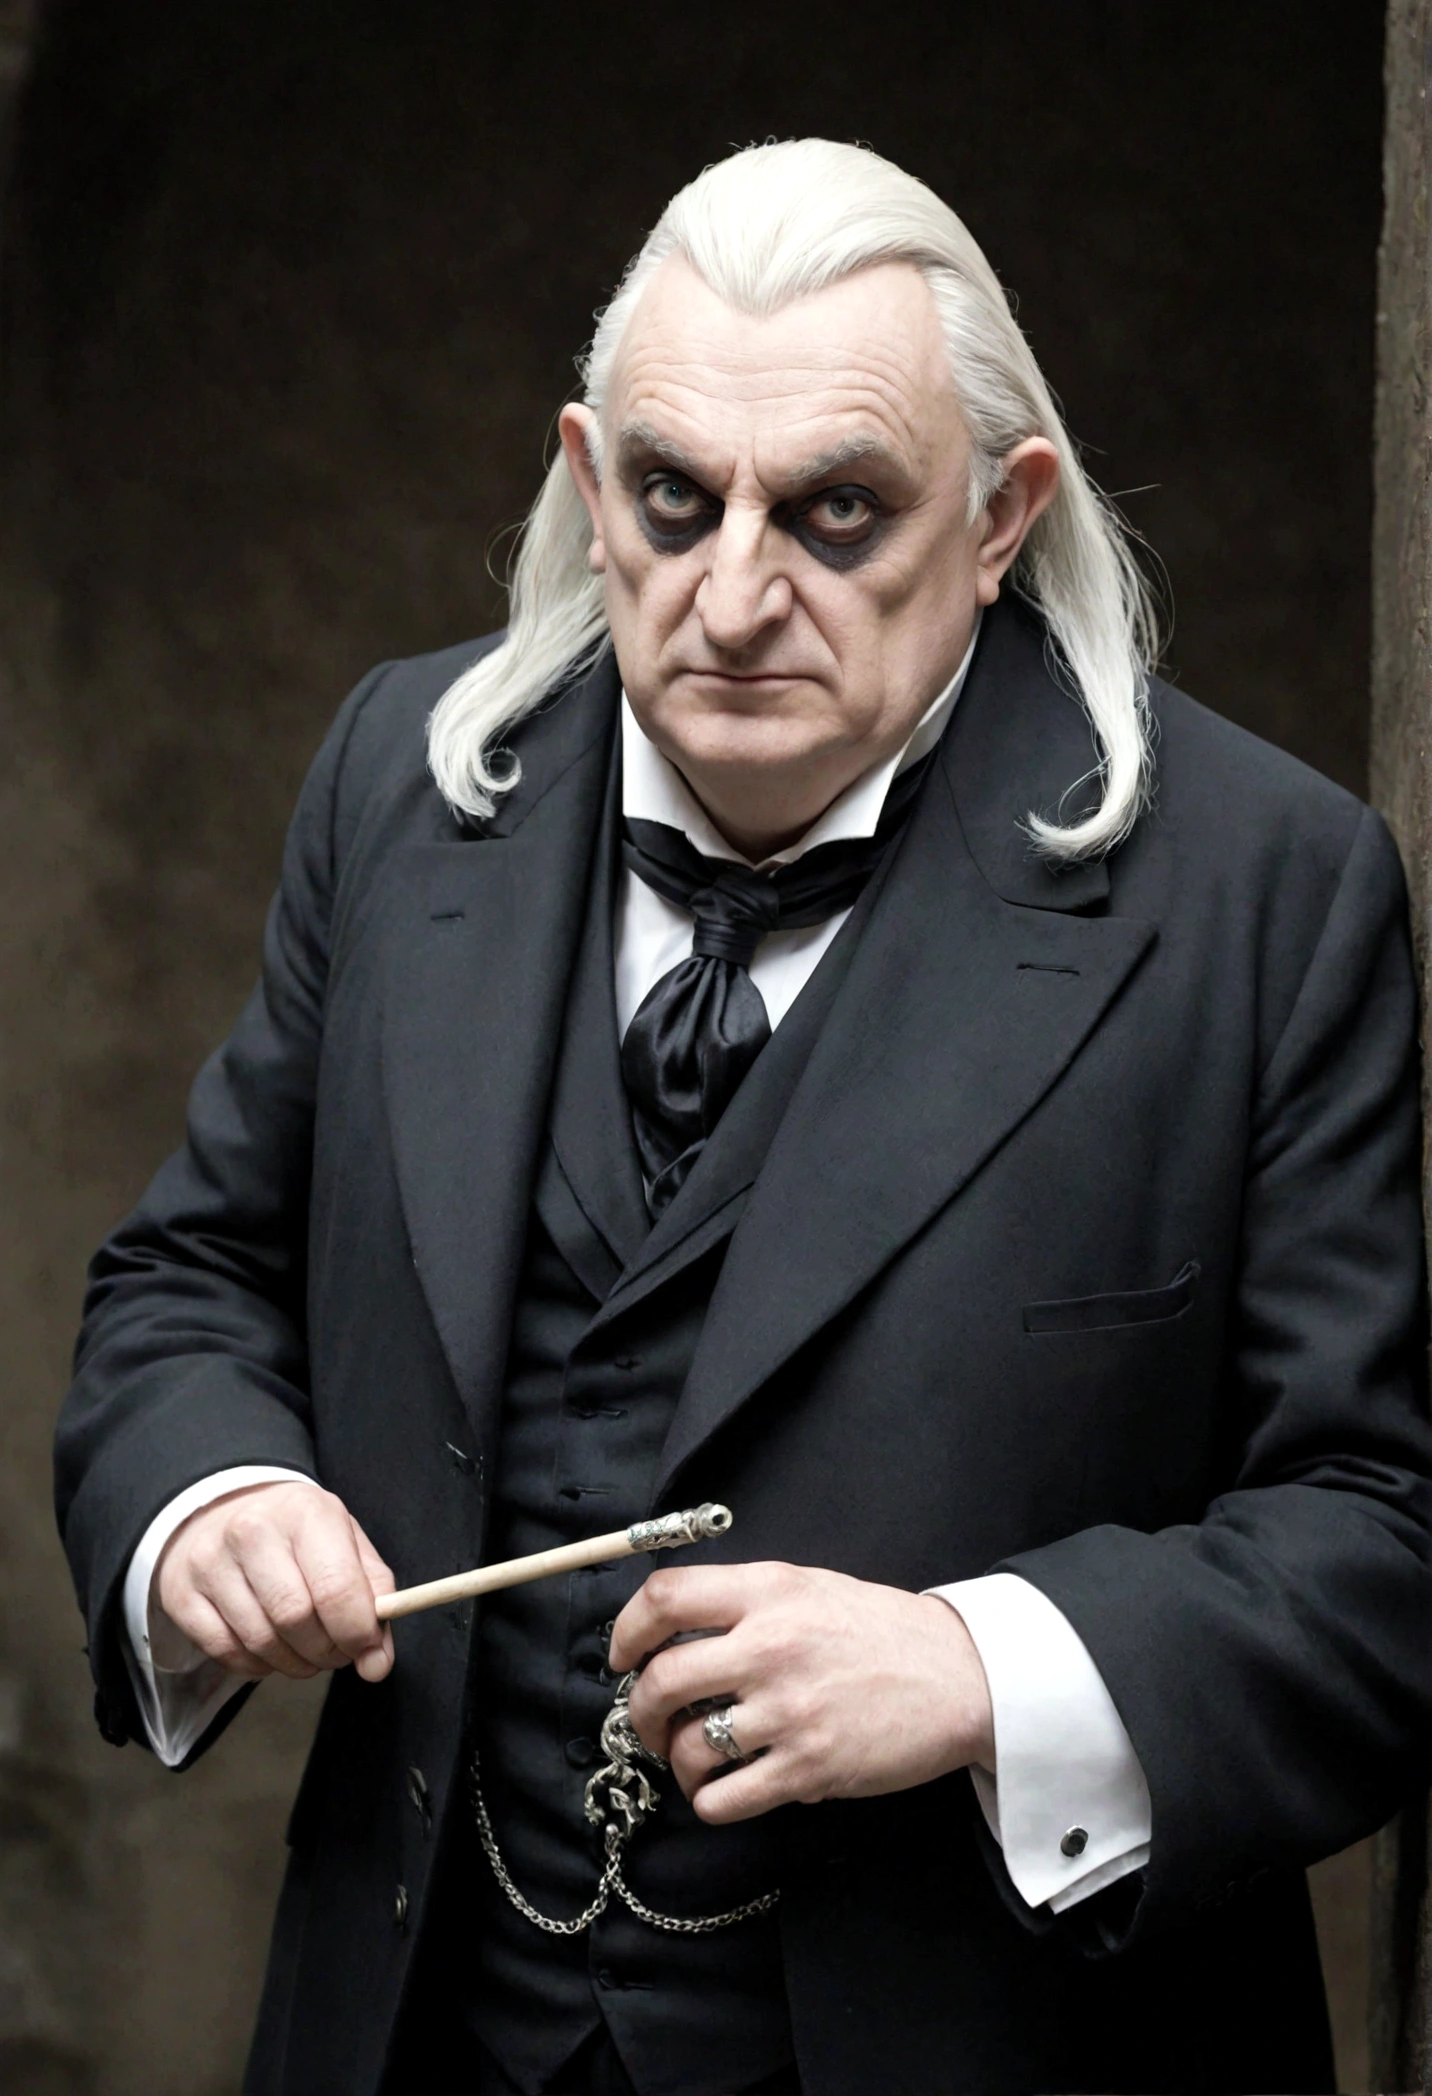 (Lord Theodore Cobblepot, in his mid-sixties, is a short and stout man. Known by the nickname "Penguin" due to his hunched posture and waddling gait, his white hair, pointed nose, and thin lips give him a cunning and sly appearance. His eyes, sharp and piercing like those of a predatory bird, add to his menacing demeanor. He typically wears dark, expensive suits made from fine fabrics. His elegant cane and silver-embellished ring symbolize his wealth and status.) ((dnd noble)), ((medieval age noble))
